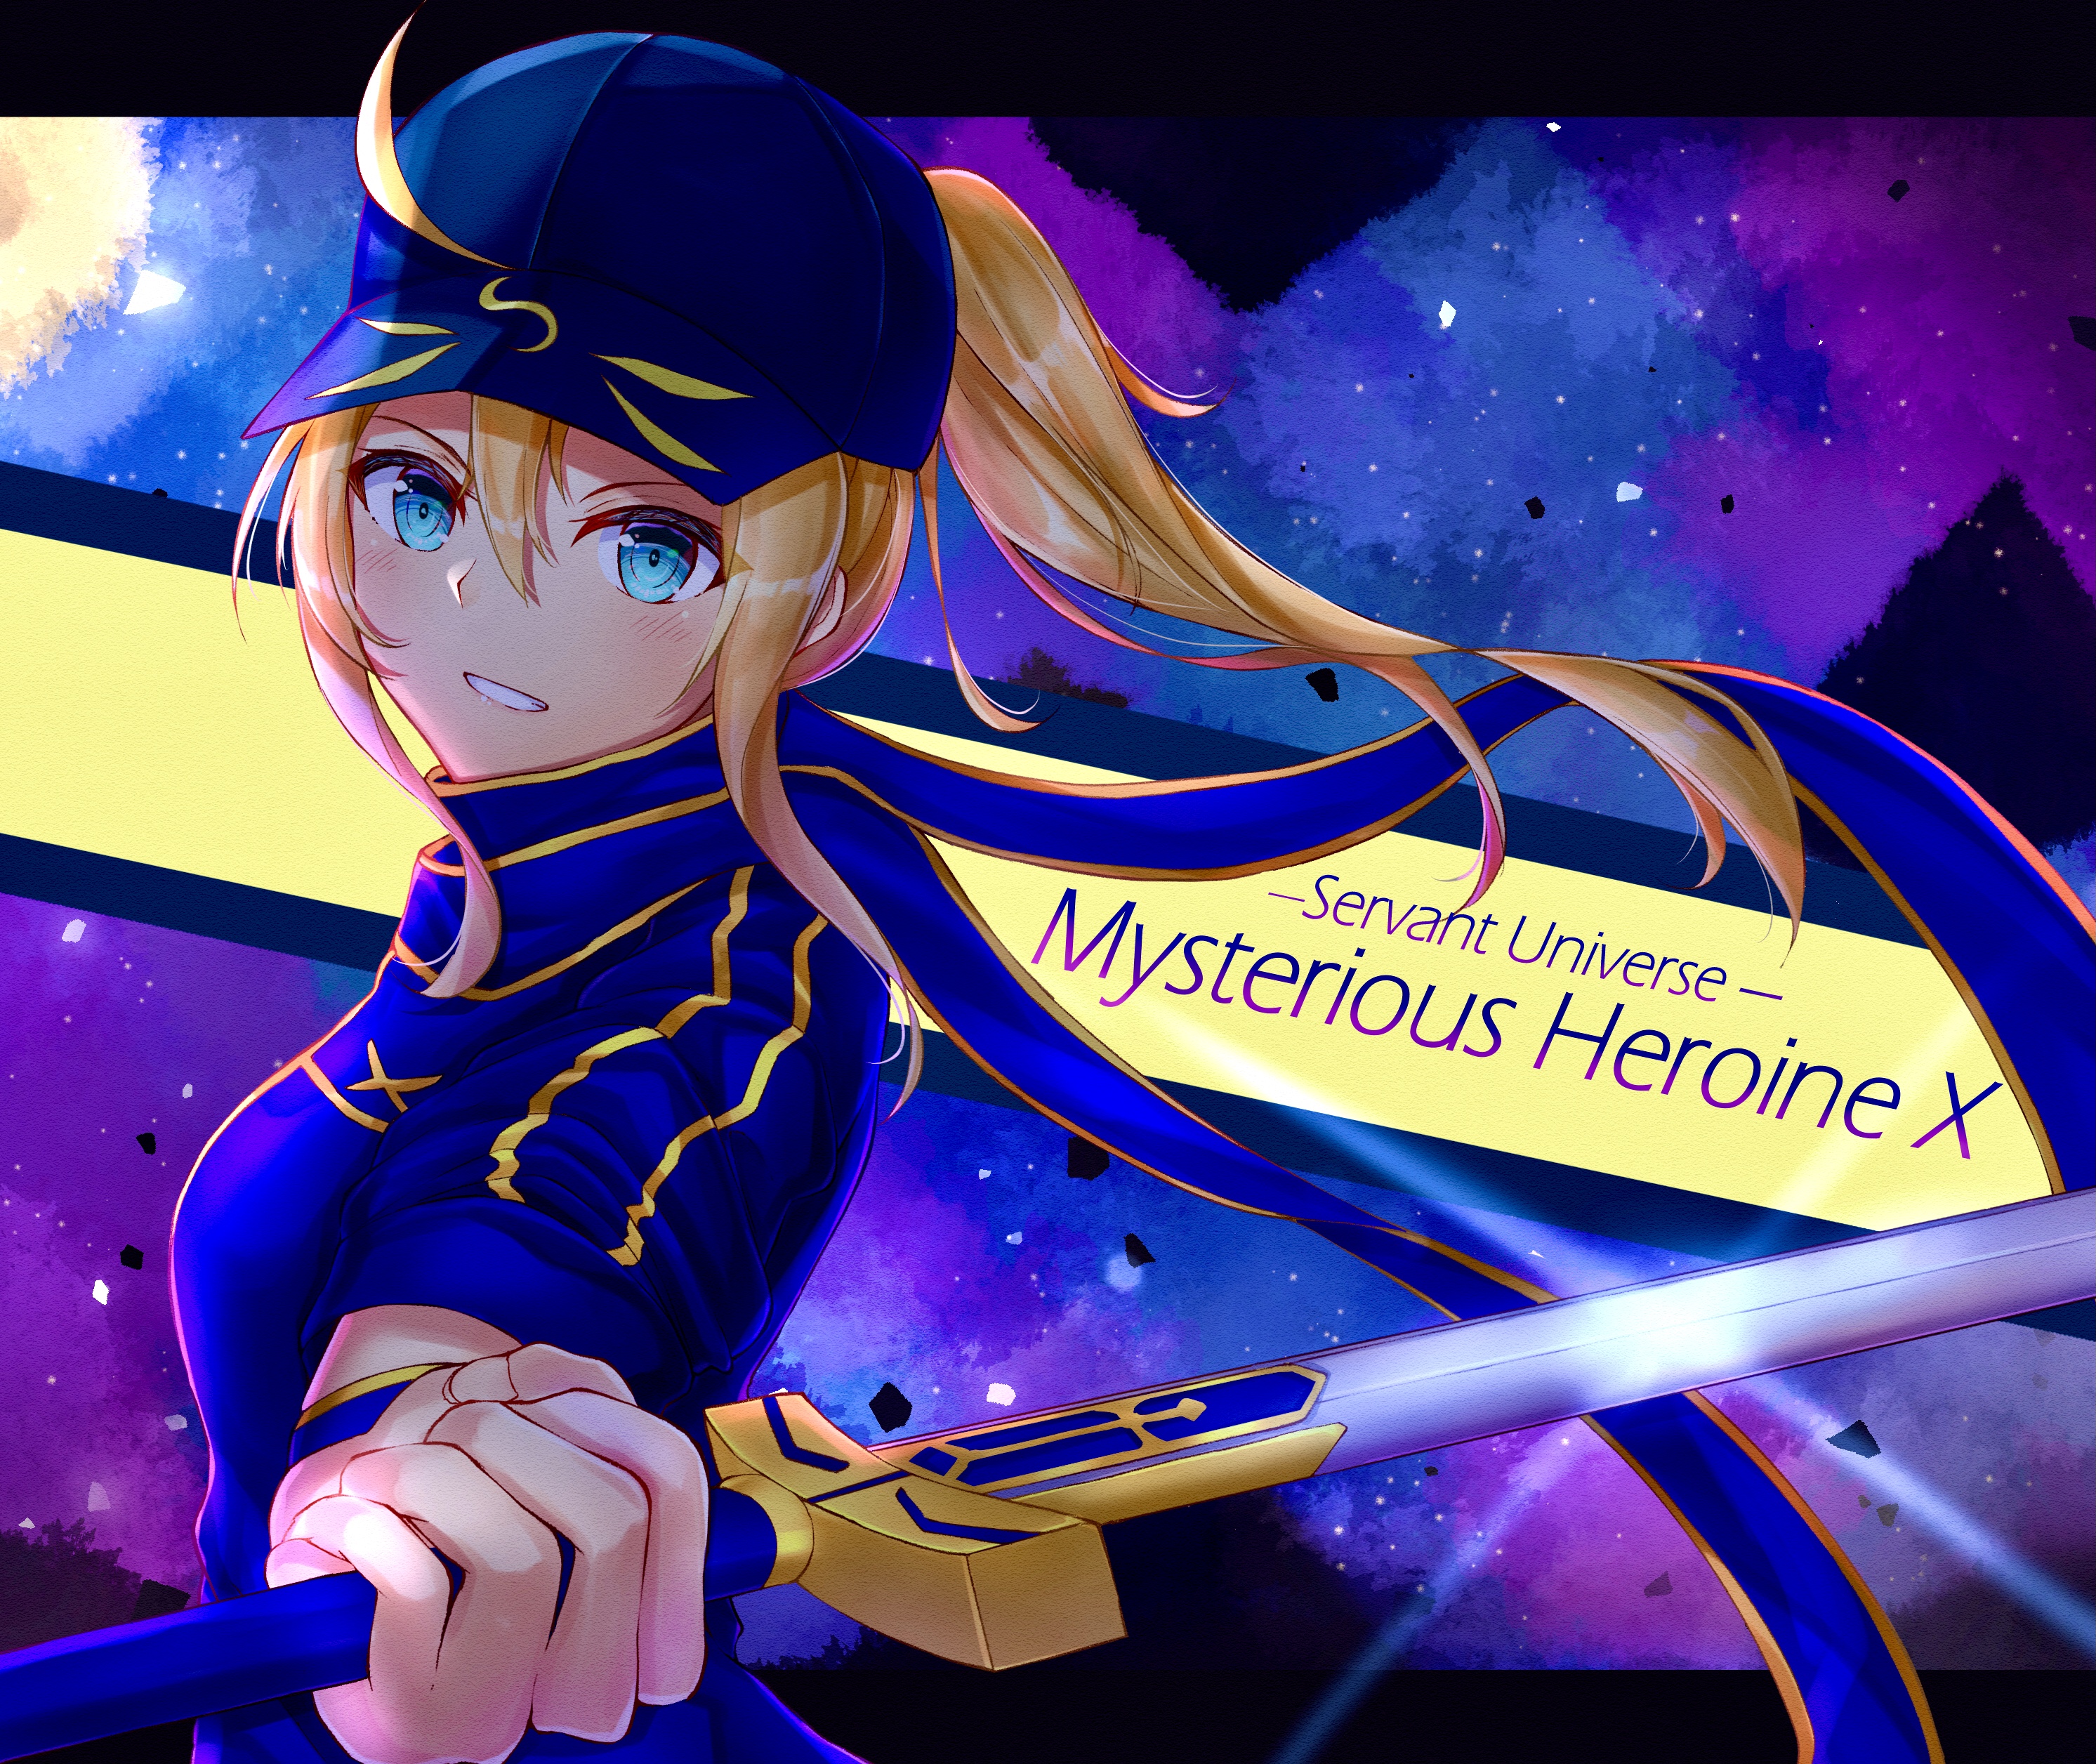 Anime Anime Girls Fate Series Fate Grand Order Mysterious Heroine X Fate Grand Order Ponytail Blonde 2985x2512